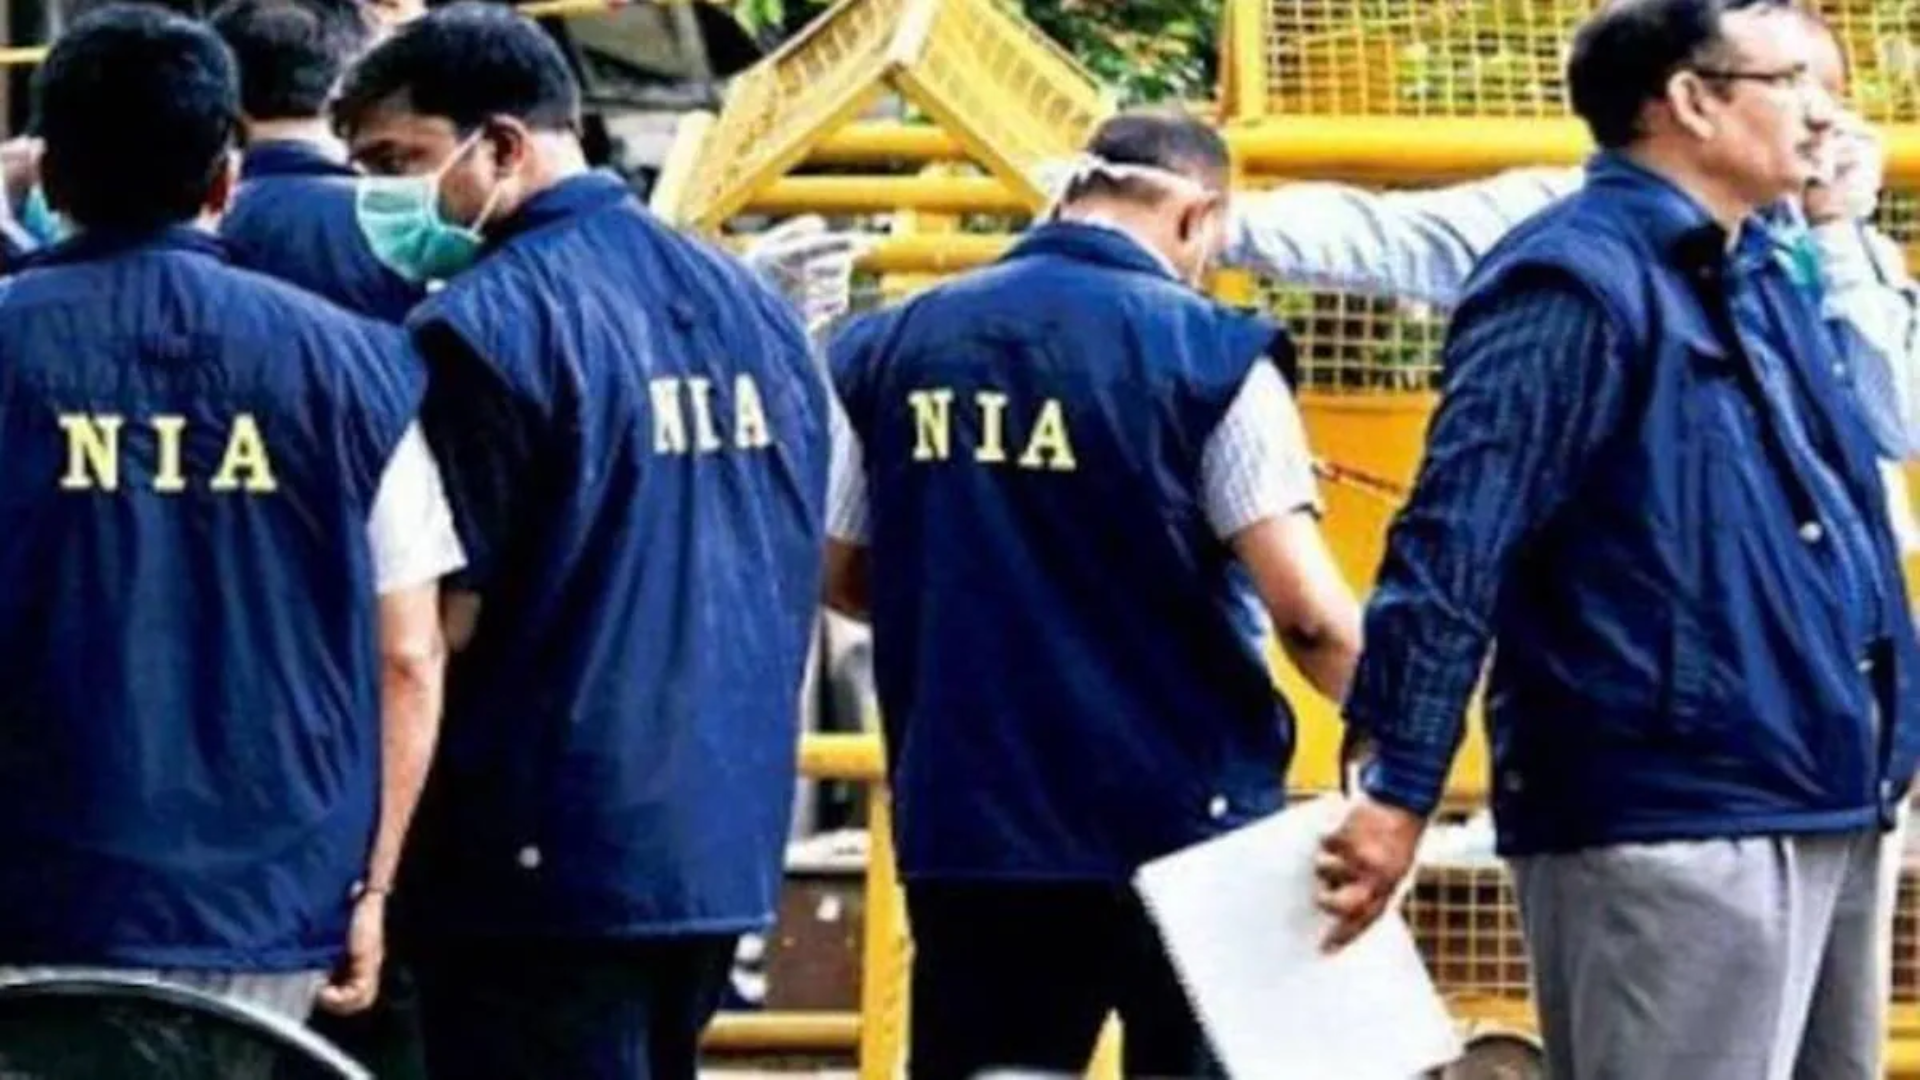 NIA Team Attacked By Protestors In West Bengal Leaving One Officer Injured During Investigation In Bhupatinagar Blast Case